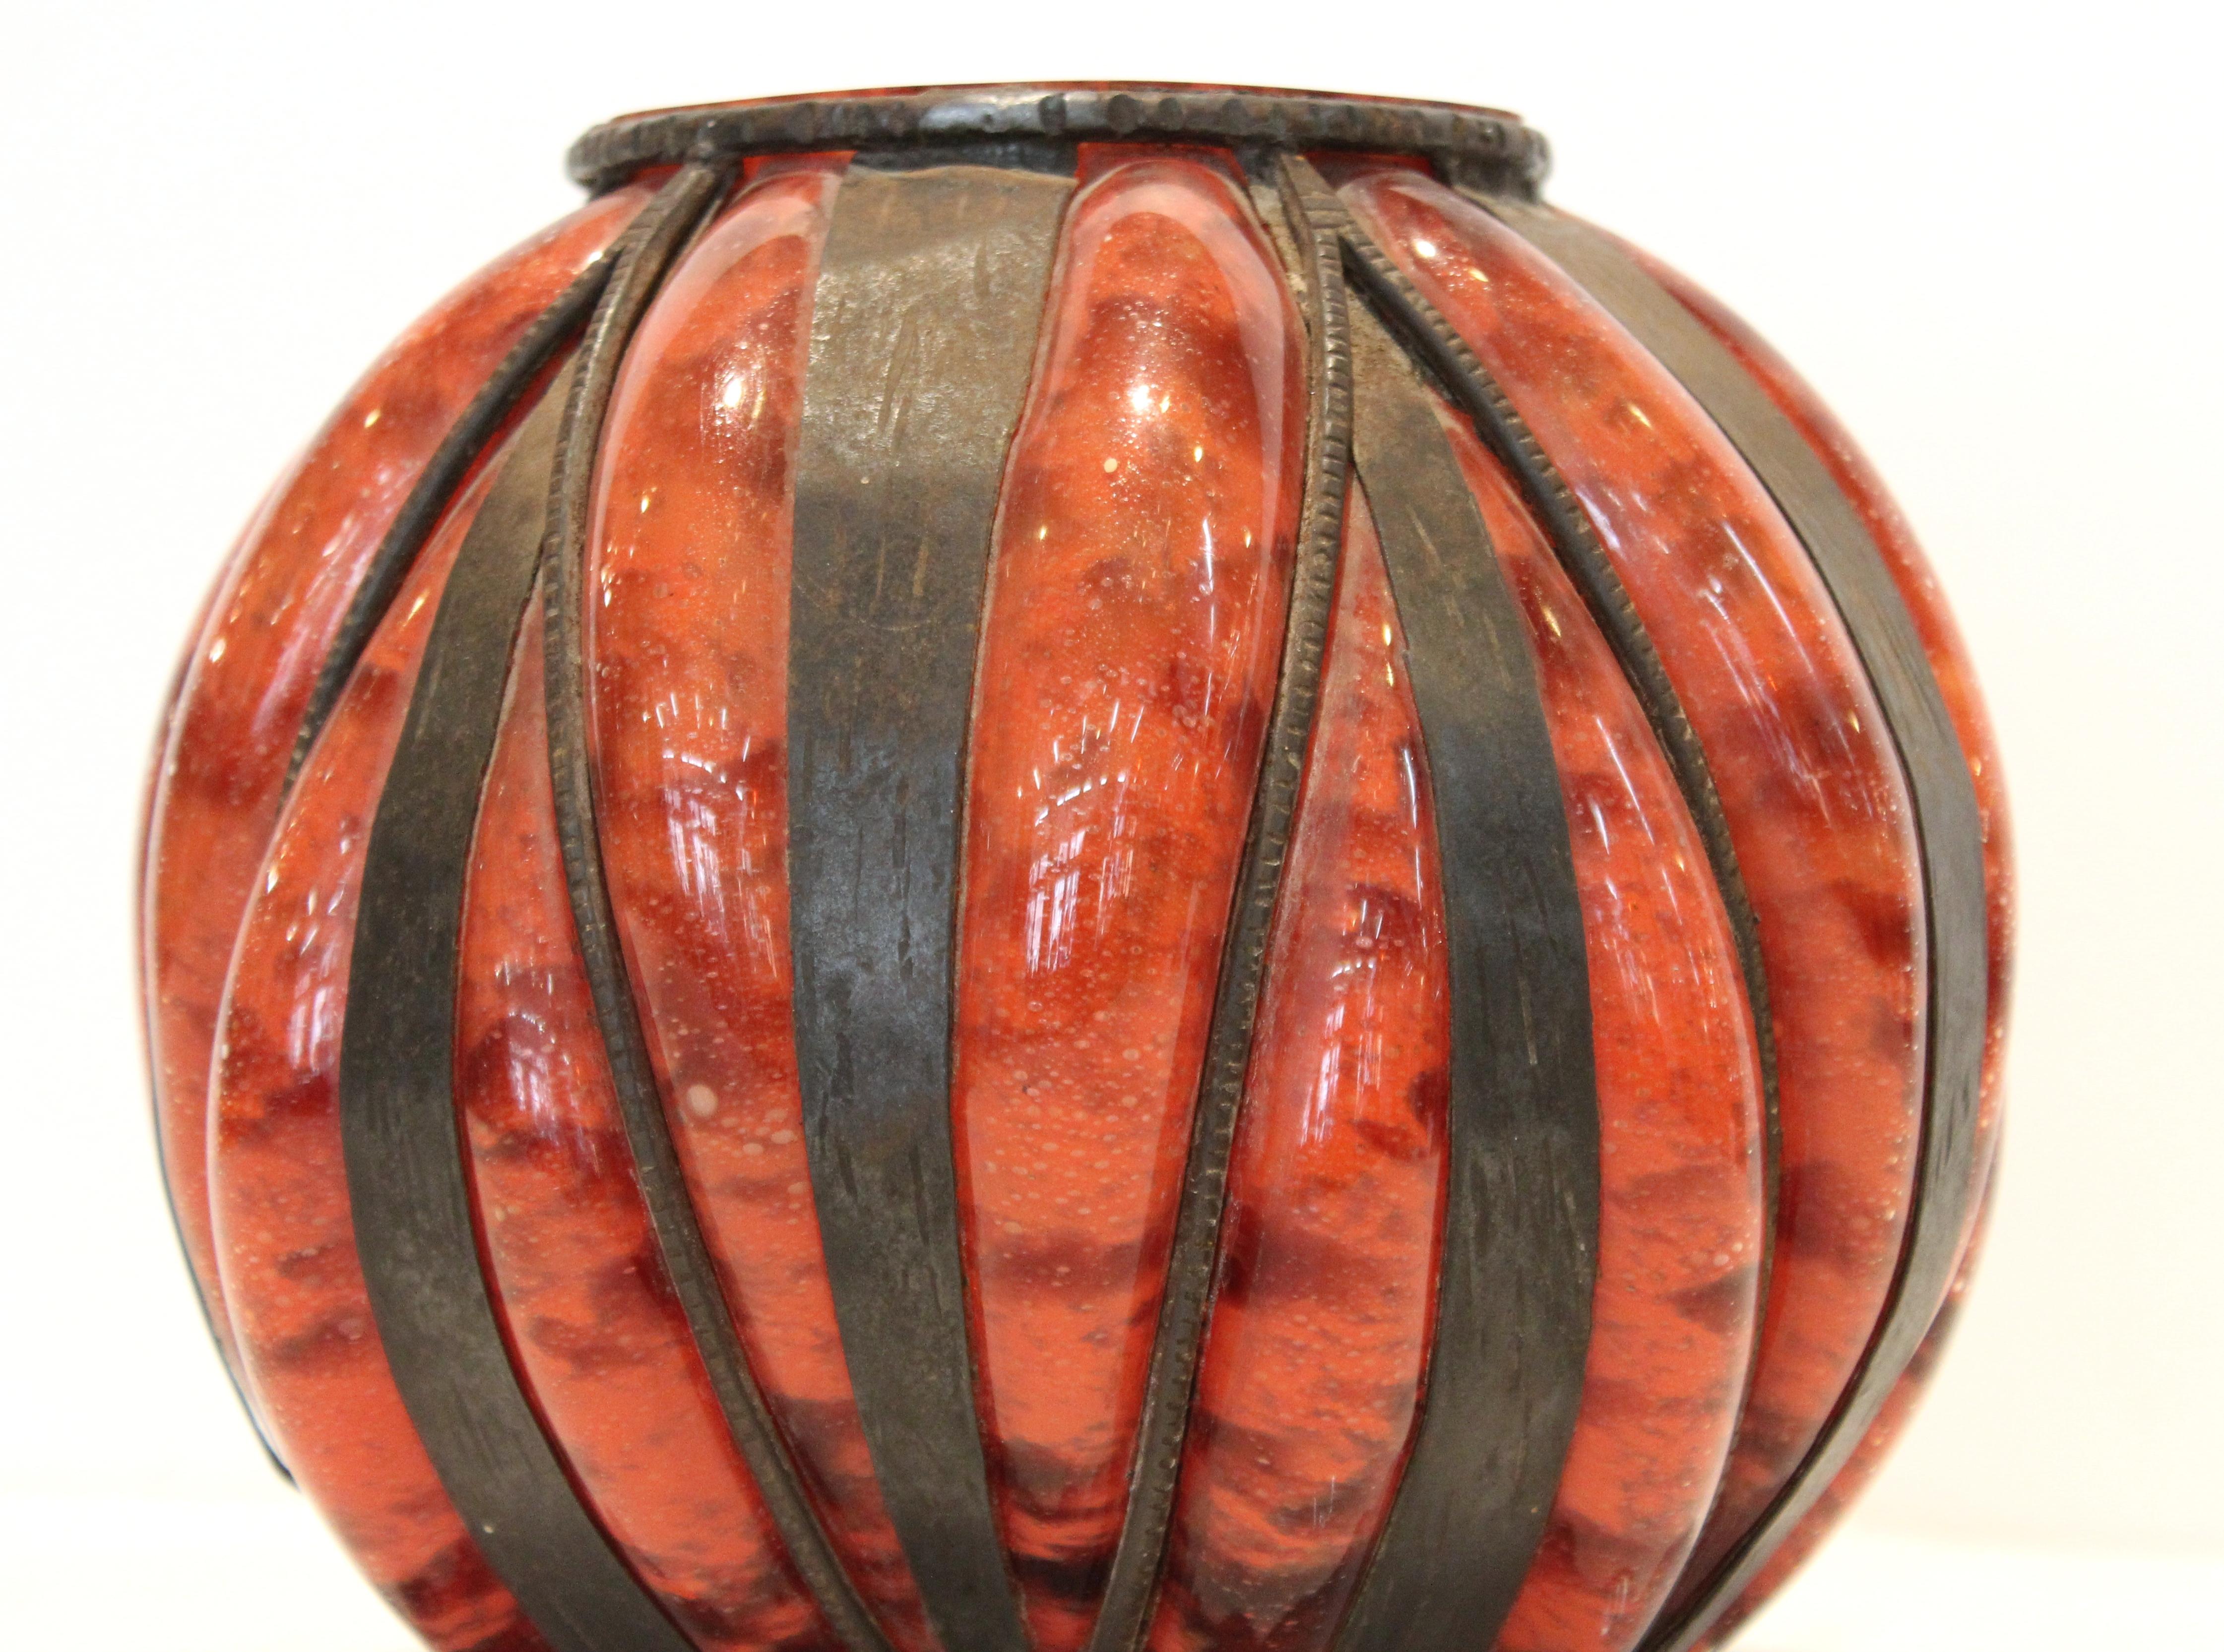 French Art Deco glass vase attributed to Degué and likely made during the mid-1920s. The piece is made of glass blown into a handwrought iron structure. Incised on the bottom 